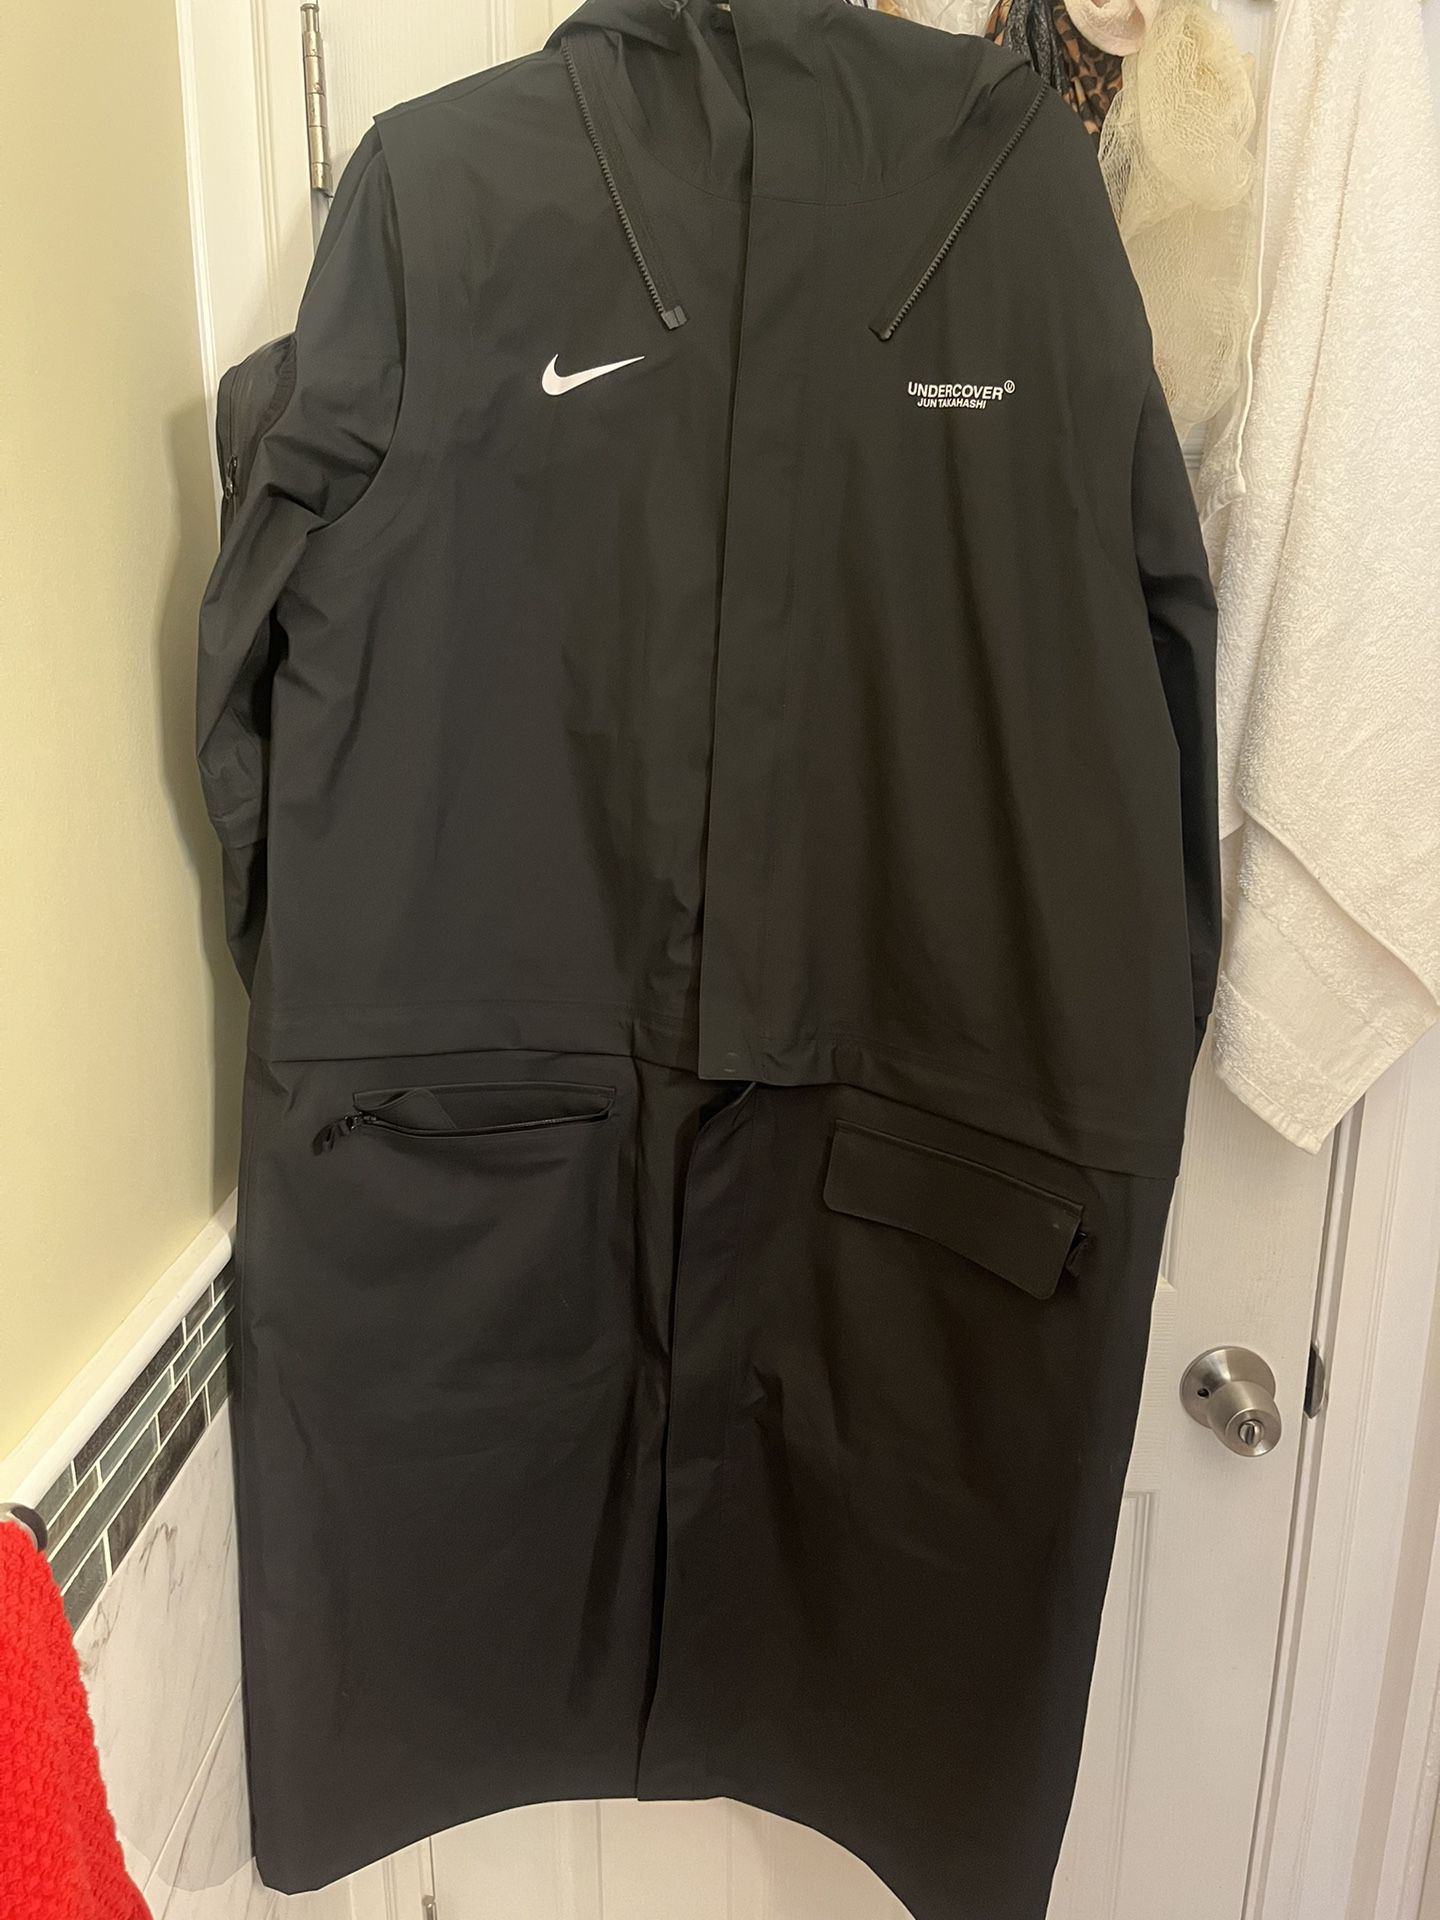 Nike x Undercover NikeLab 2-in-1 Parka Jacket  -Size L